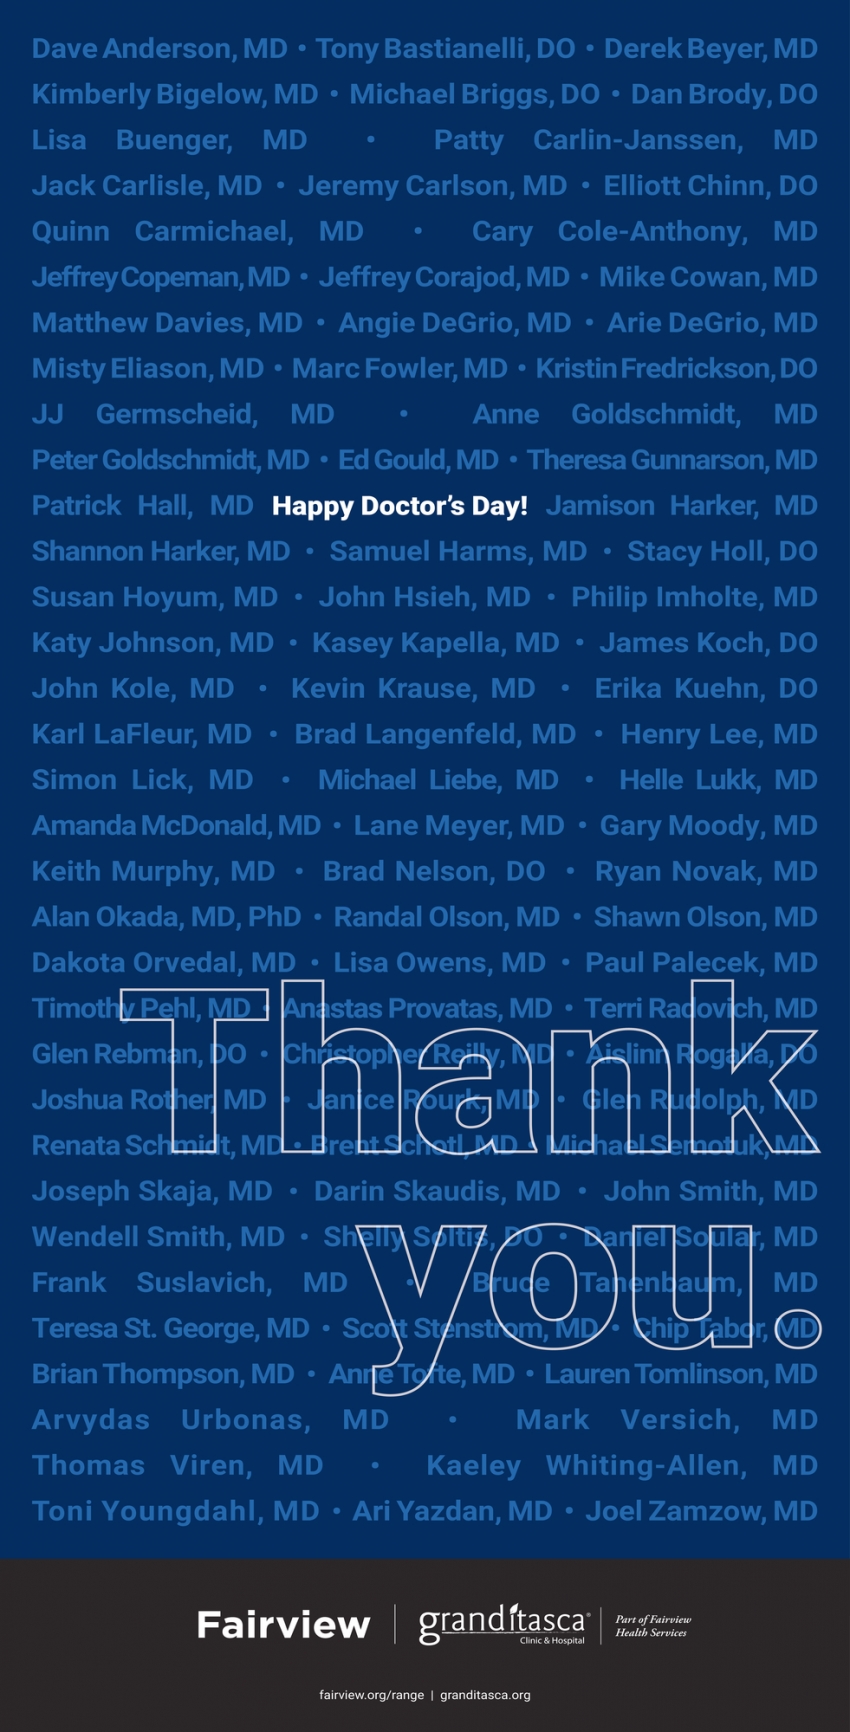 Happy Doctor's Day!